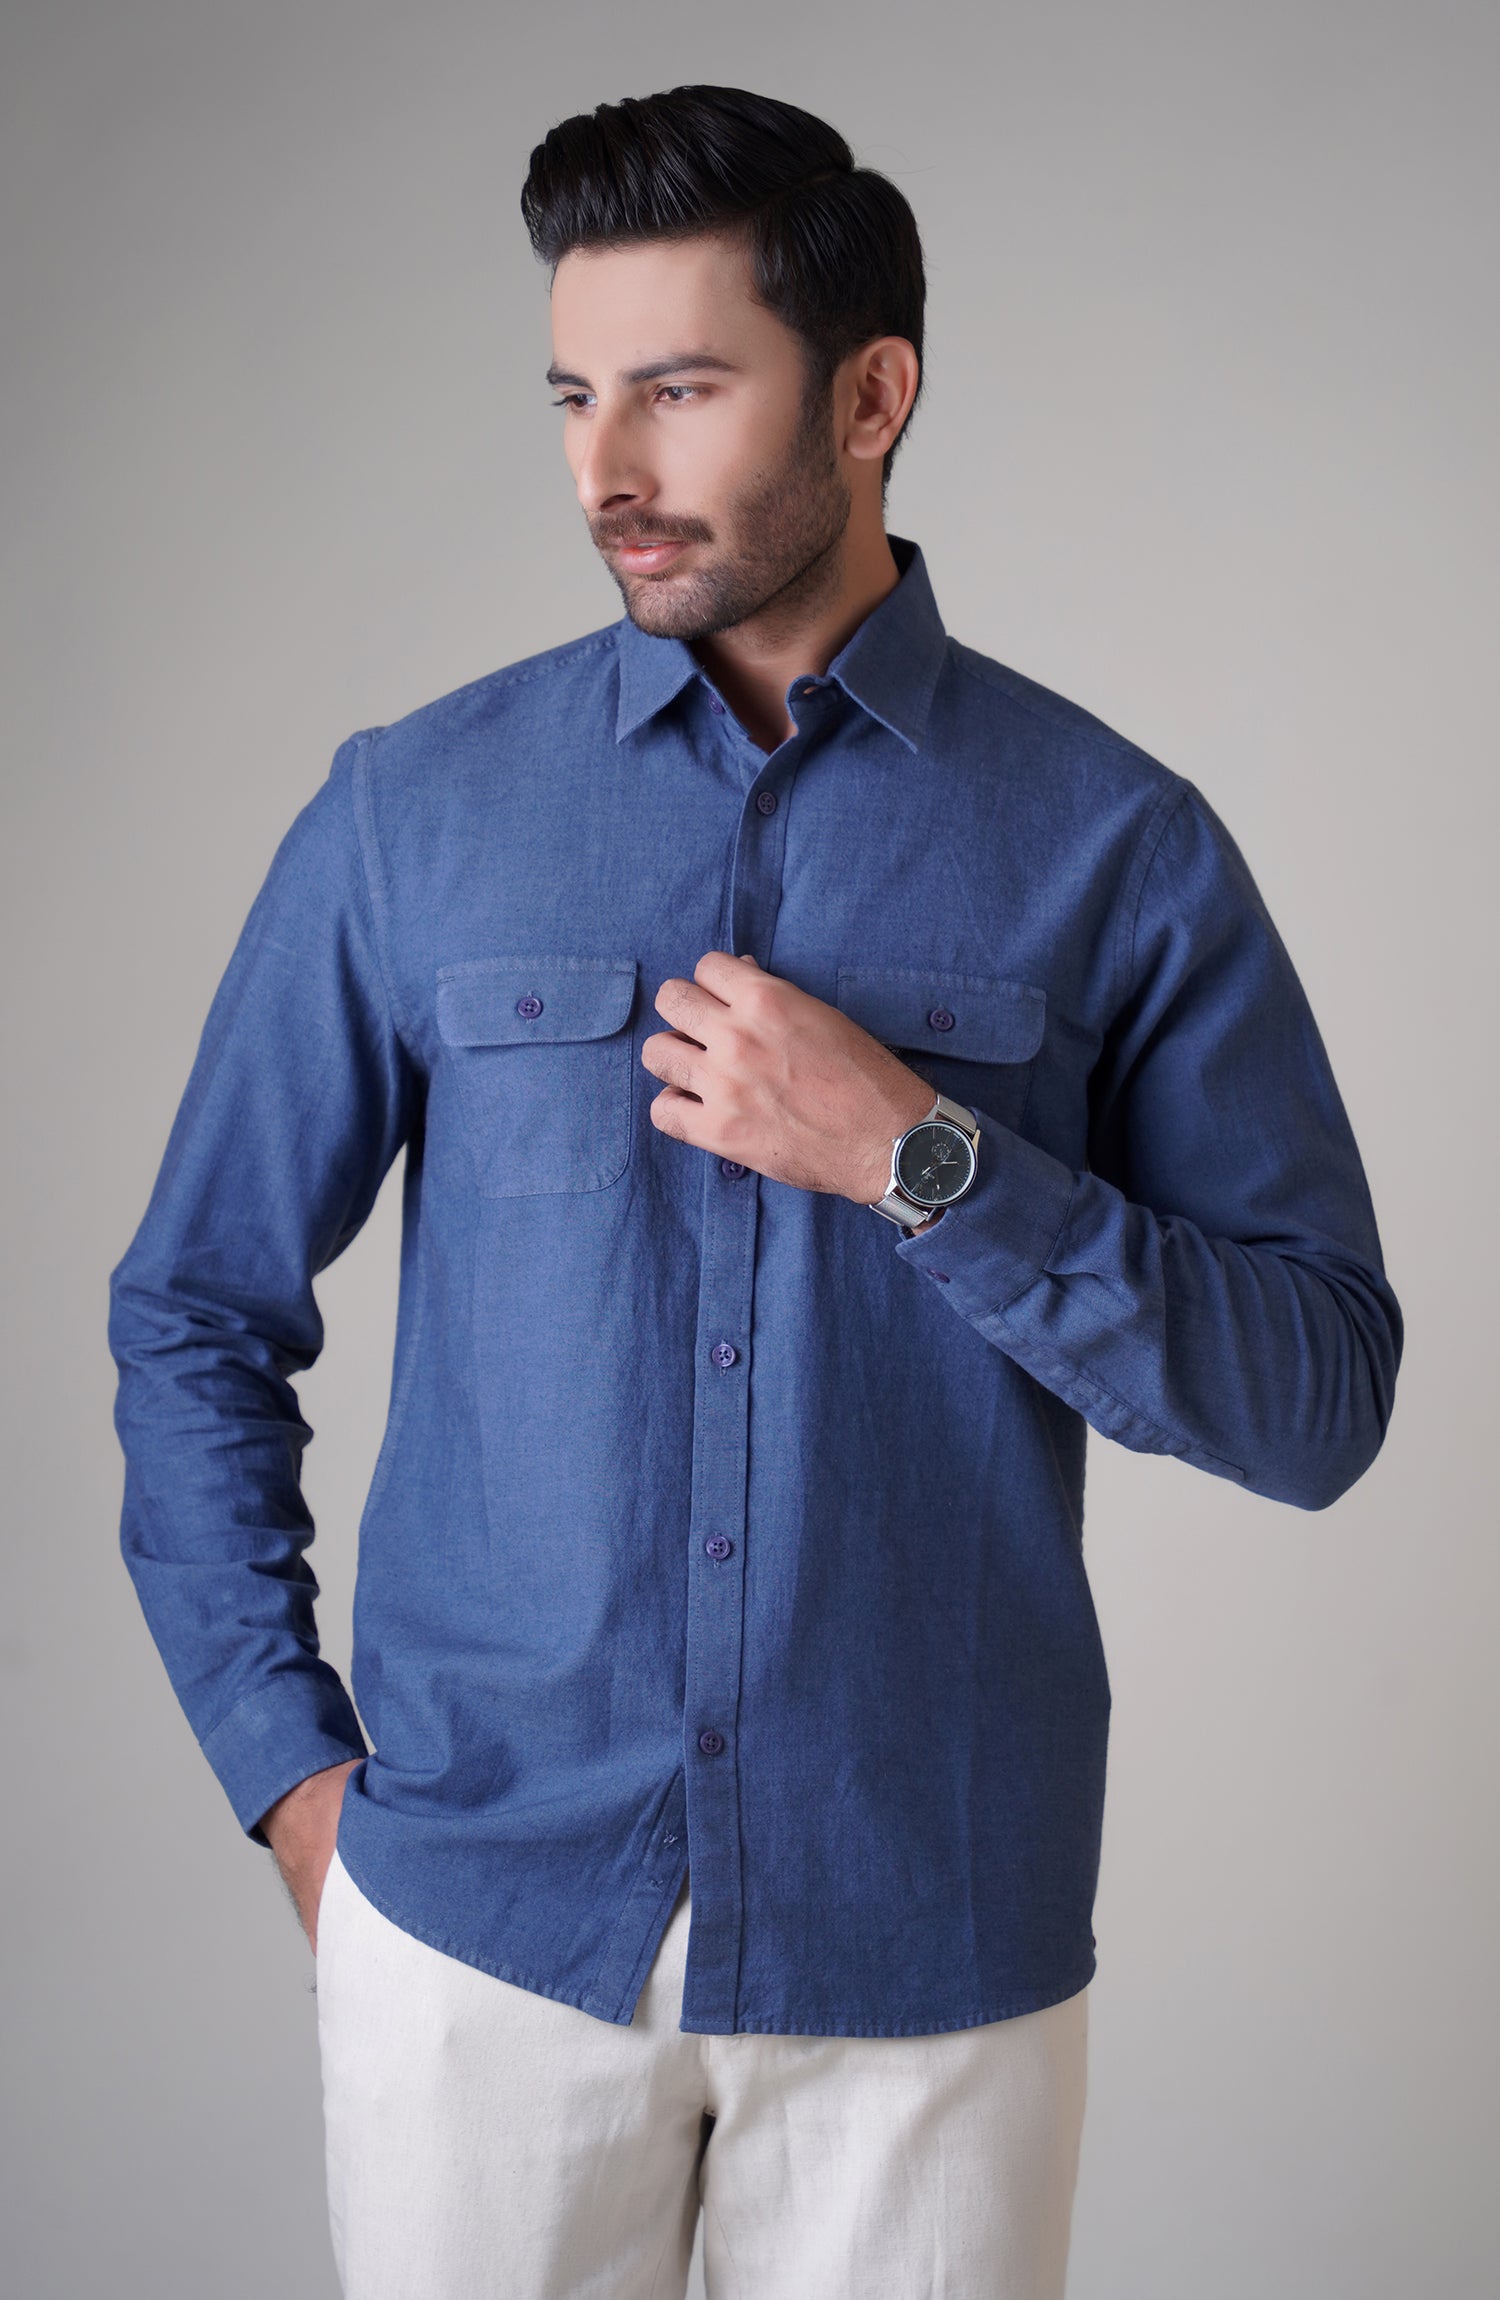 stay cool in summer ss11 | Denim shirt with jeans, Levi, Mens denim